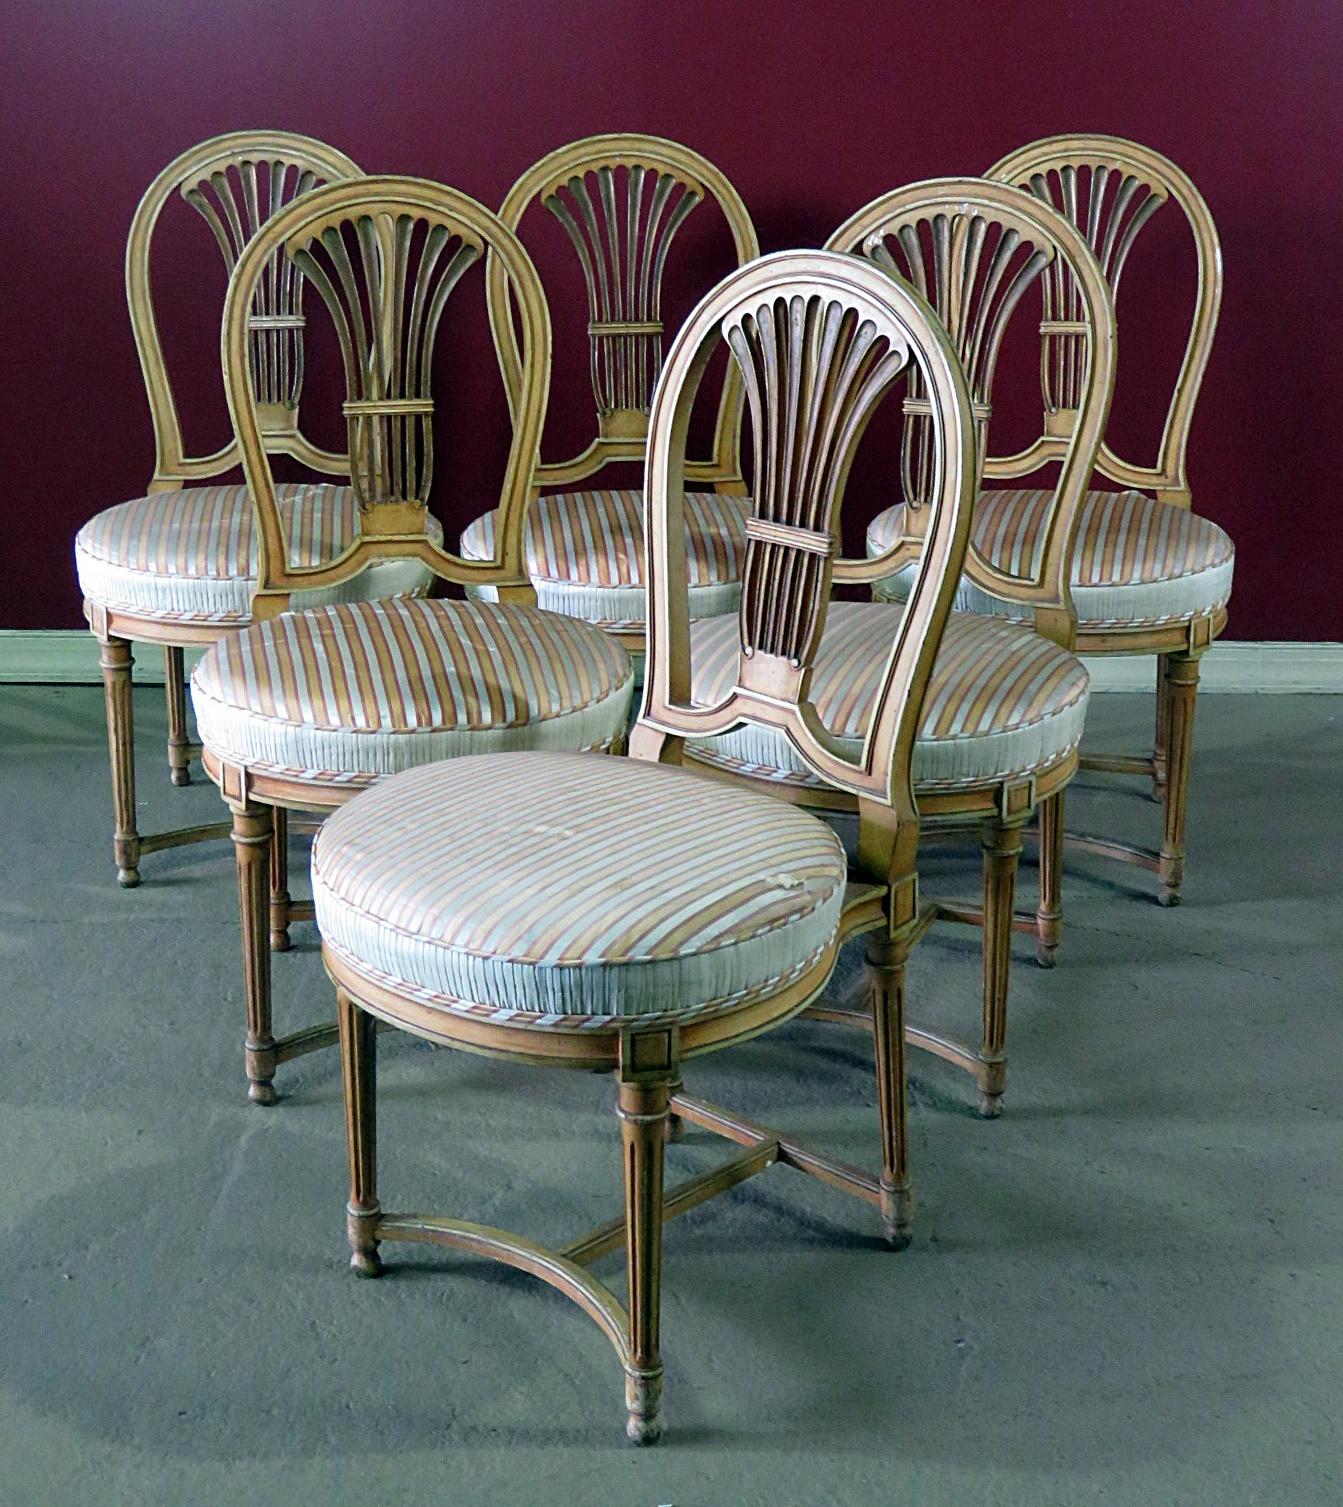 These gorgeous chairs are designed in the style of Maison Jansen who drew influences from Gustavian and French designs. These chairs may even be Jansen but are unmarked. Their simple yet sophisticated lines are further set apart by their completely